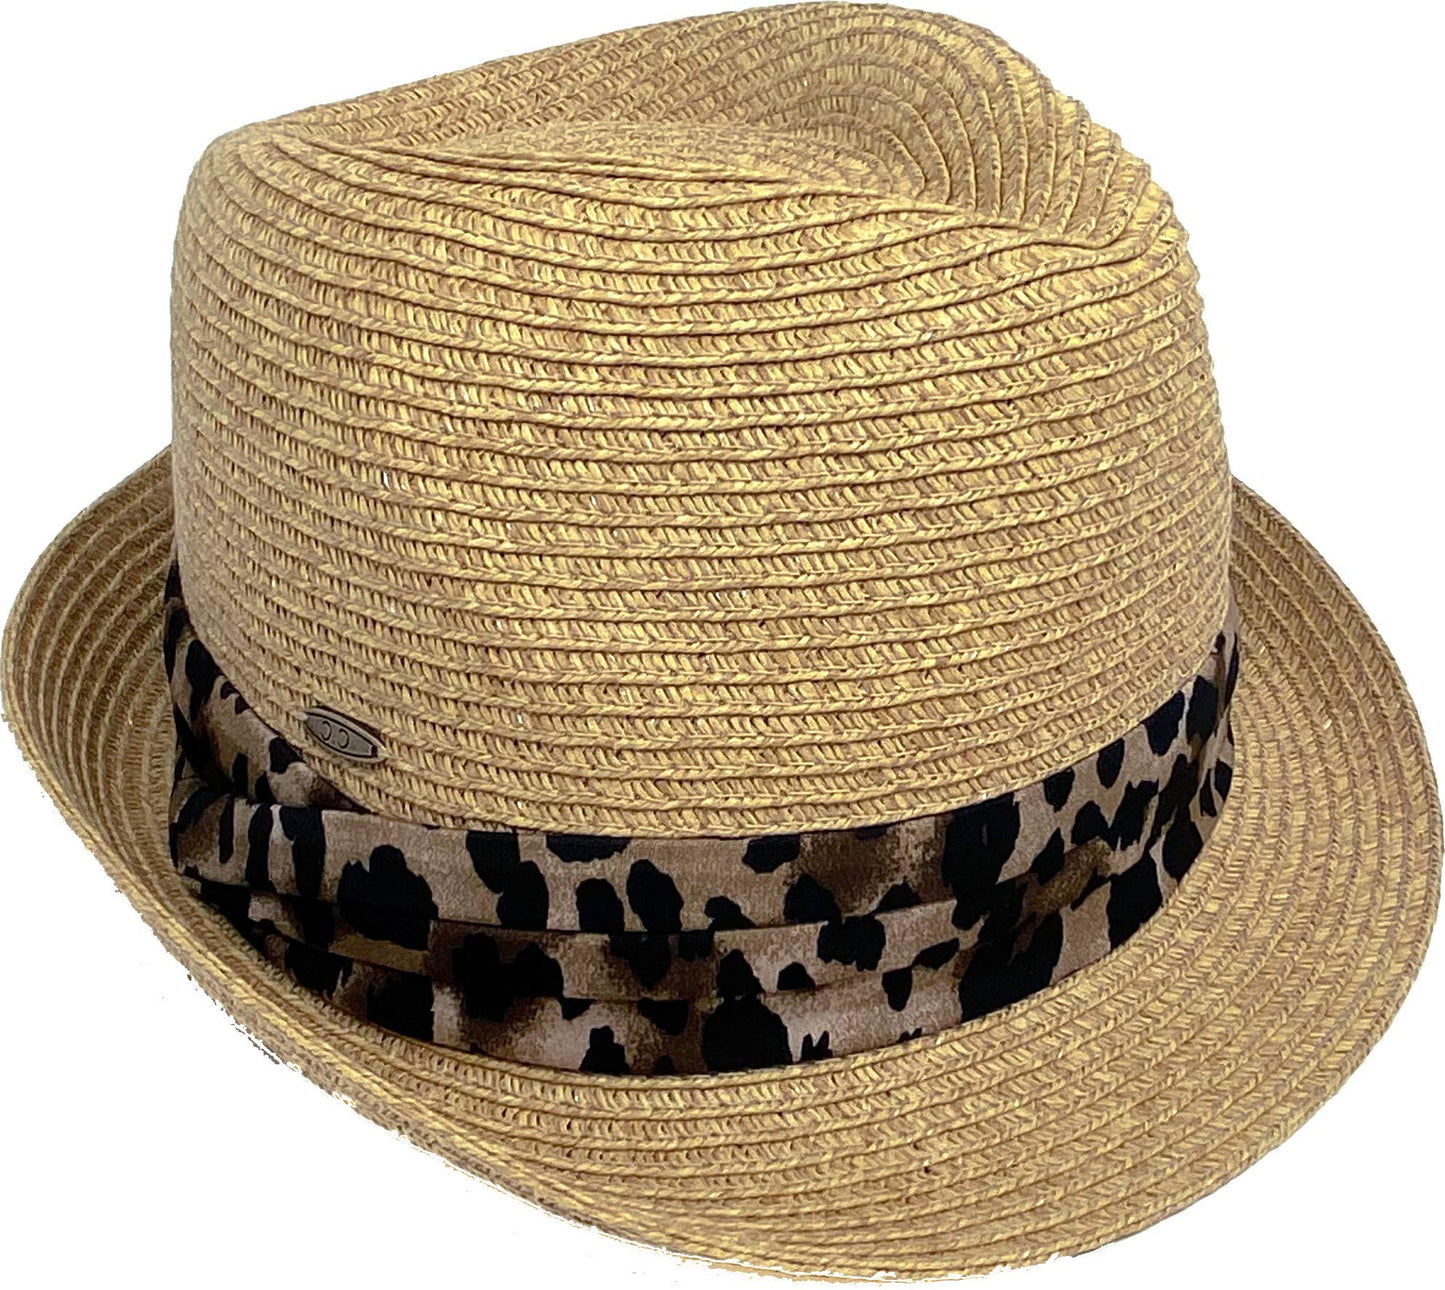 Decorative Band Straw Summer Fedora by Funky Junque